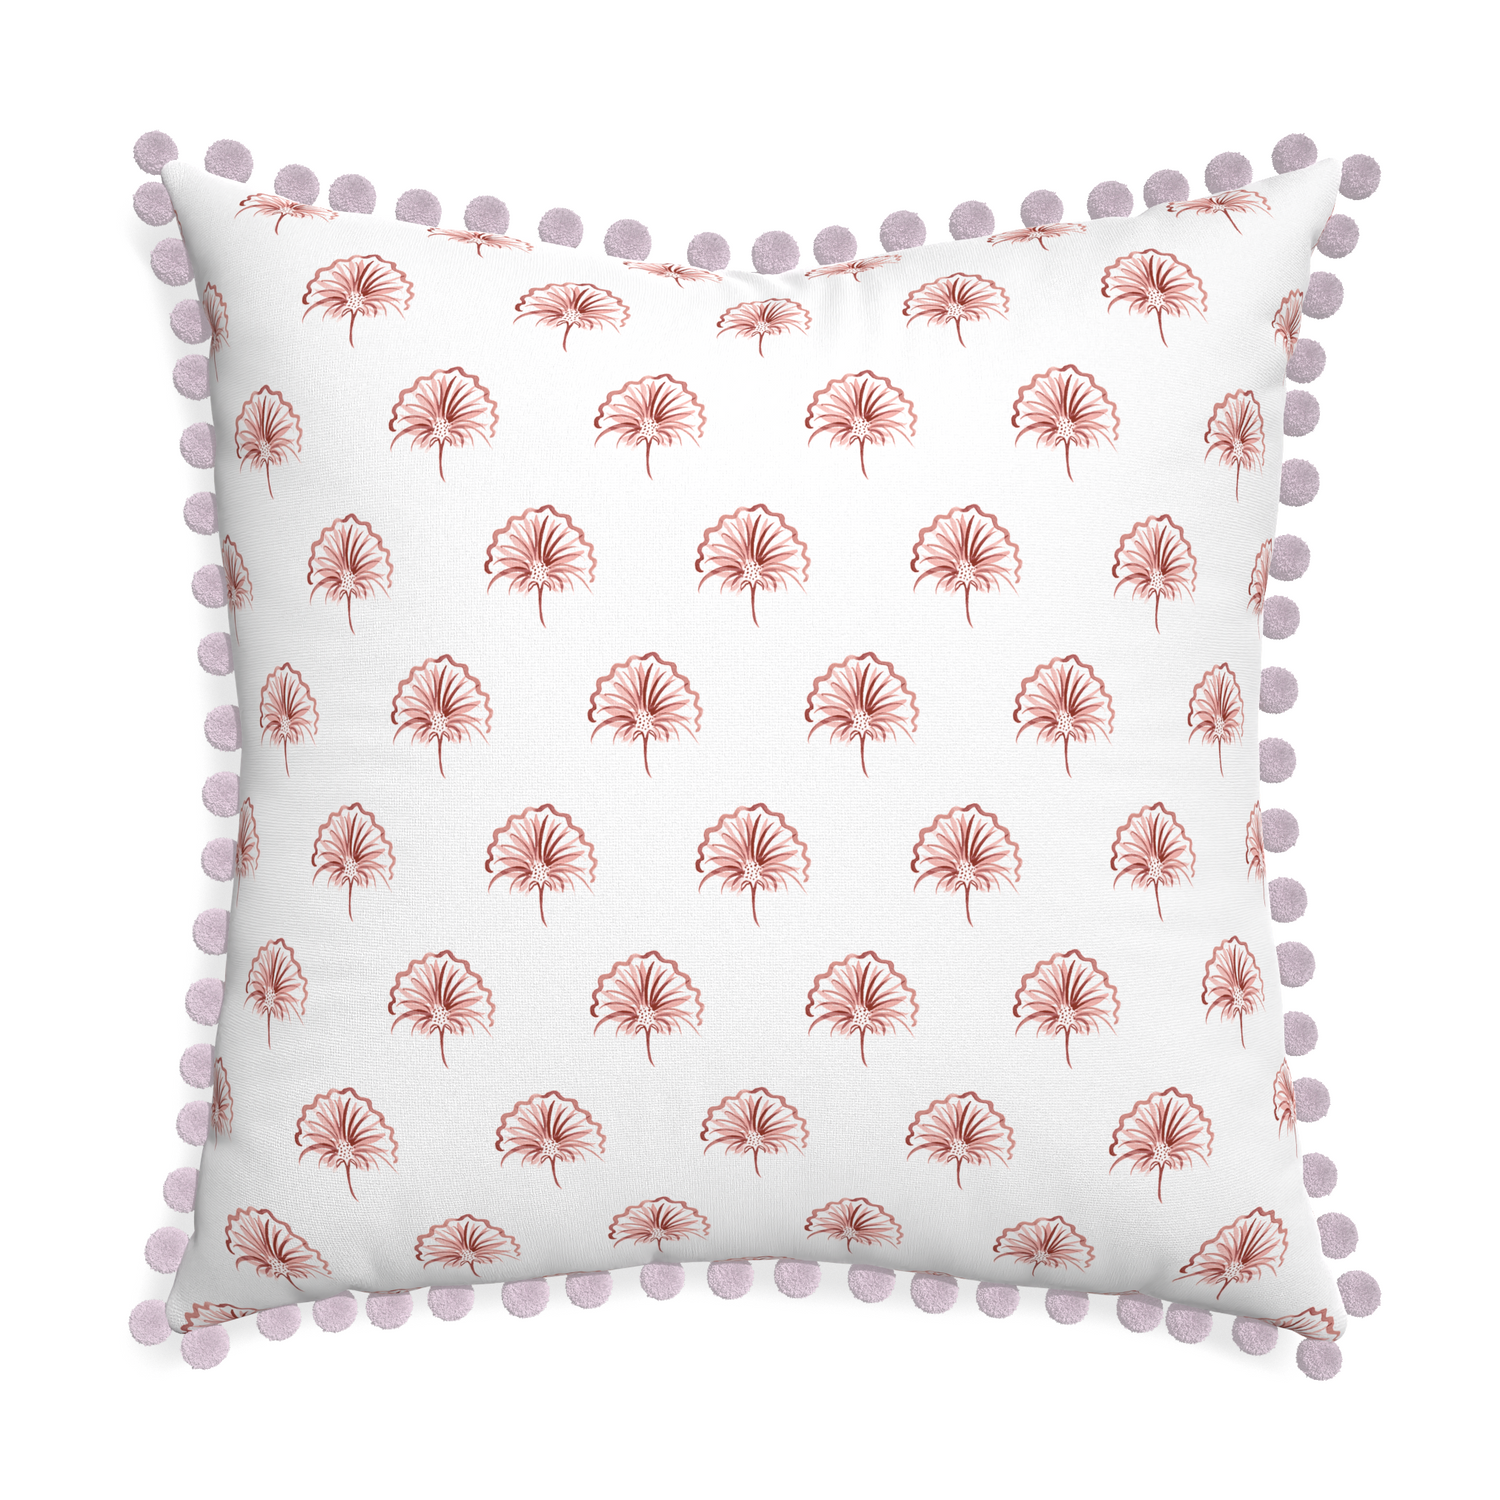 Euro-sham penelope rose custom floral pinkpillow with l on white background